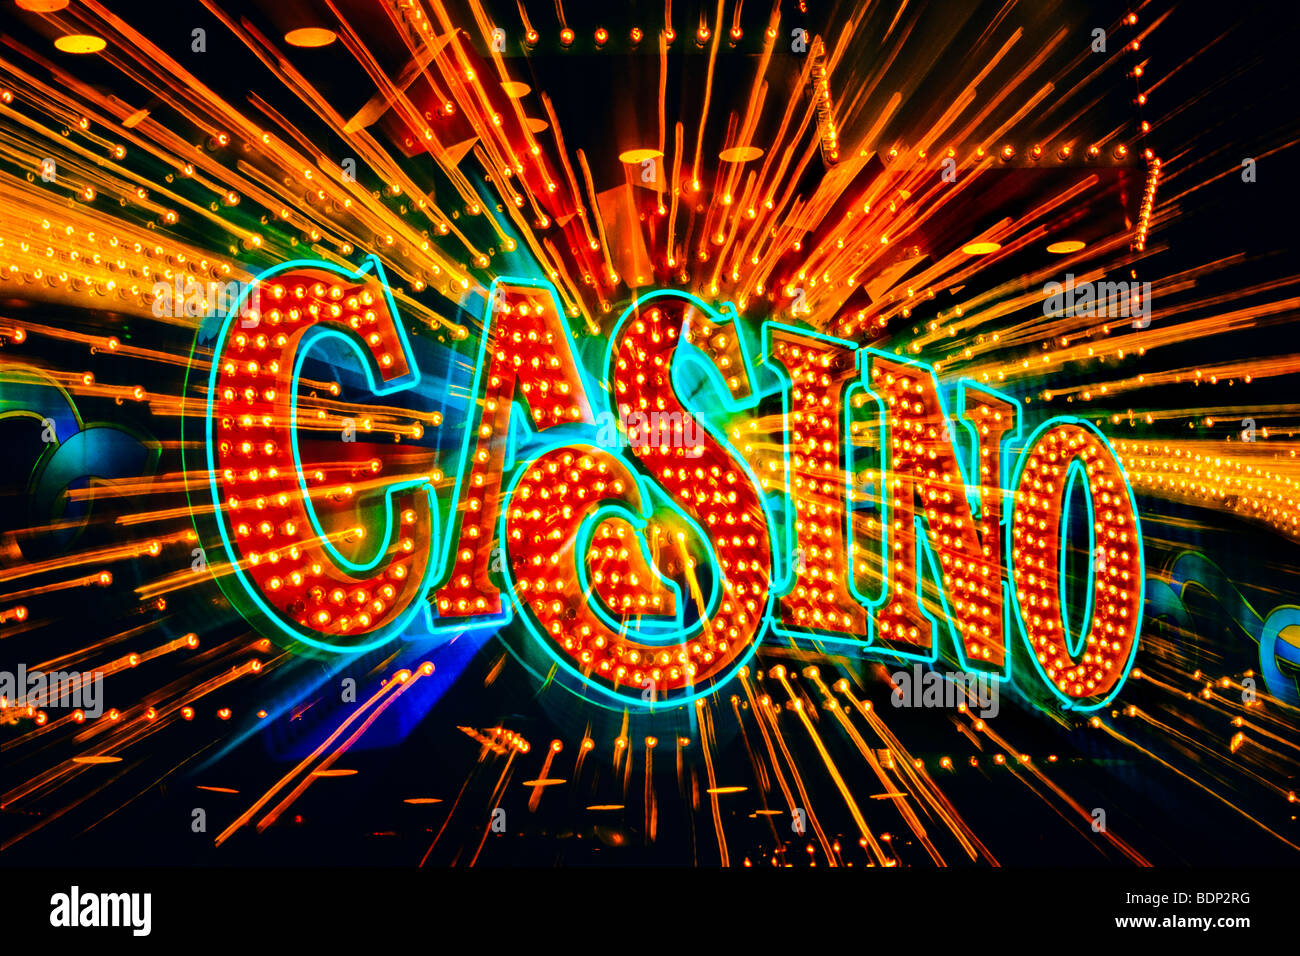 Valid Forms Of Id For Casino